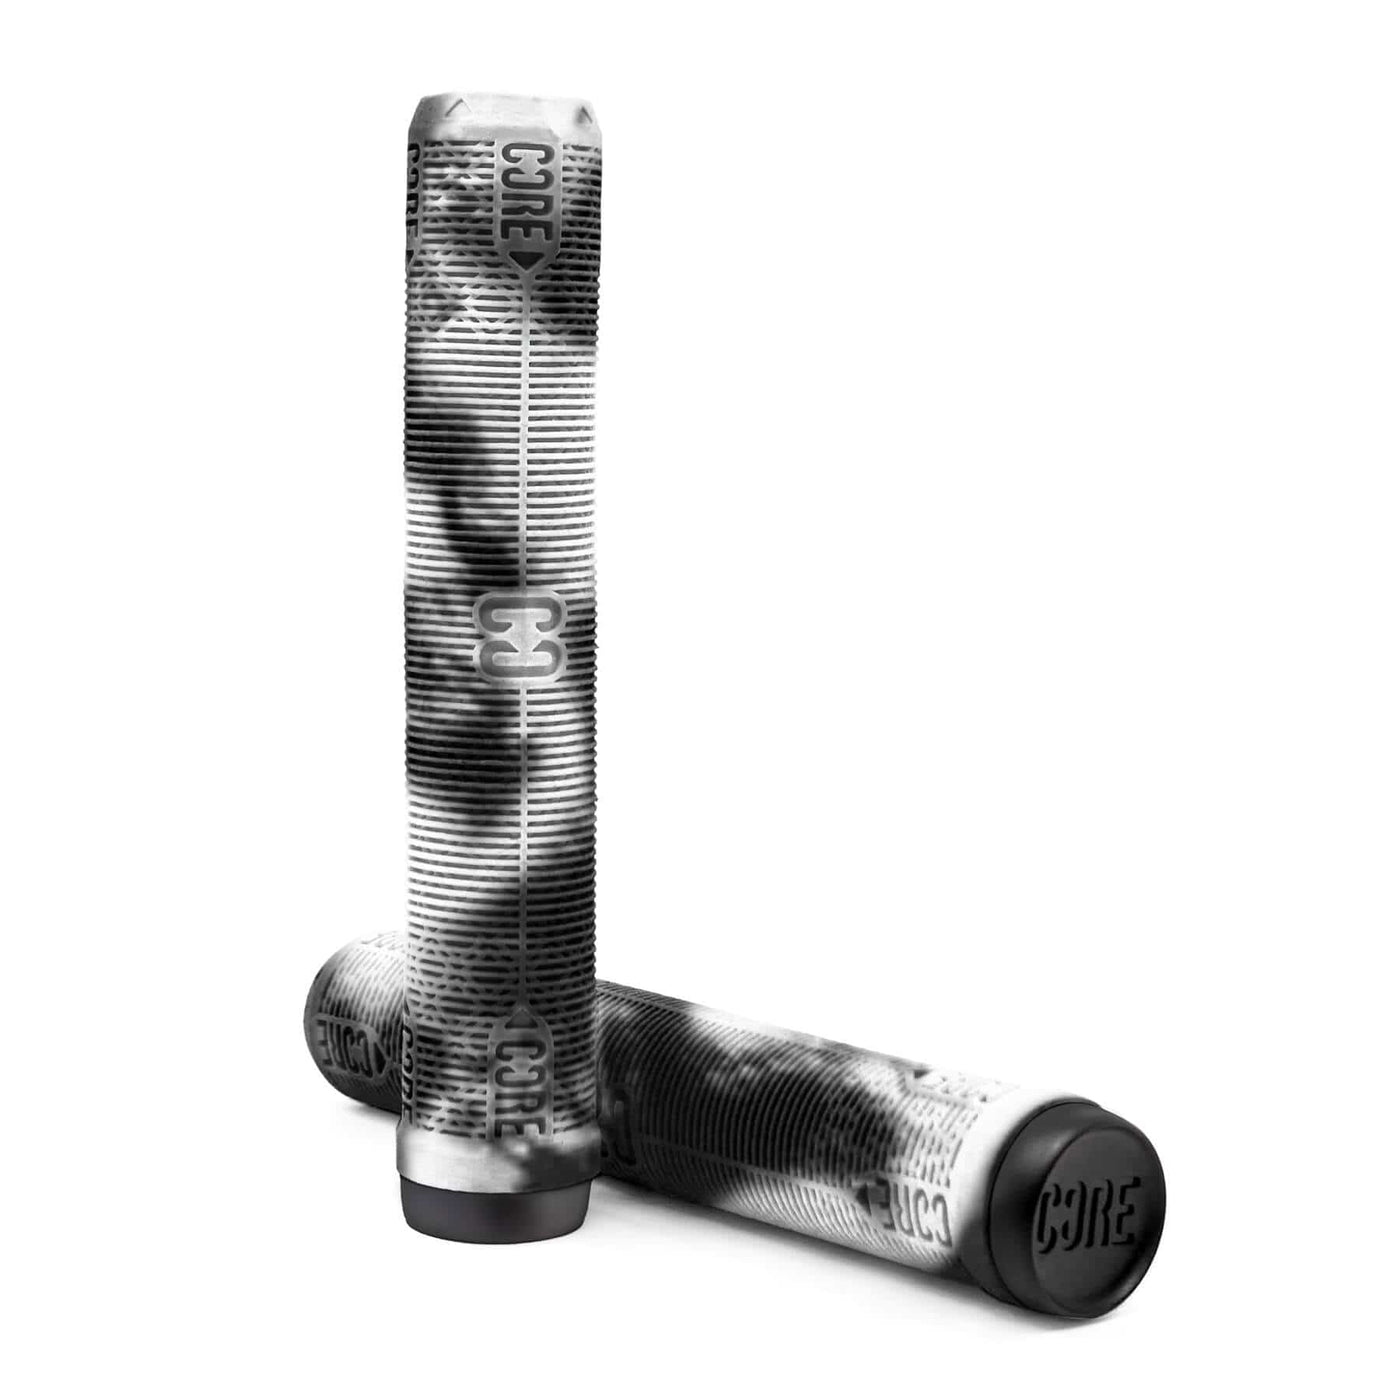 CORE Skinny Boy Scooter Handlebar Grips 170mm White/Black I Scooter Grips